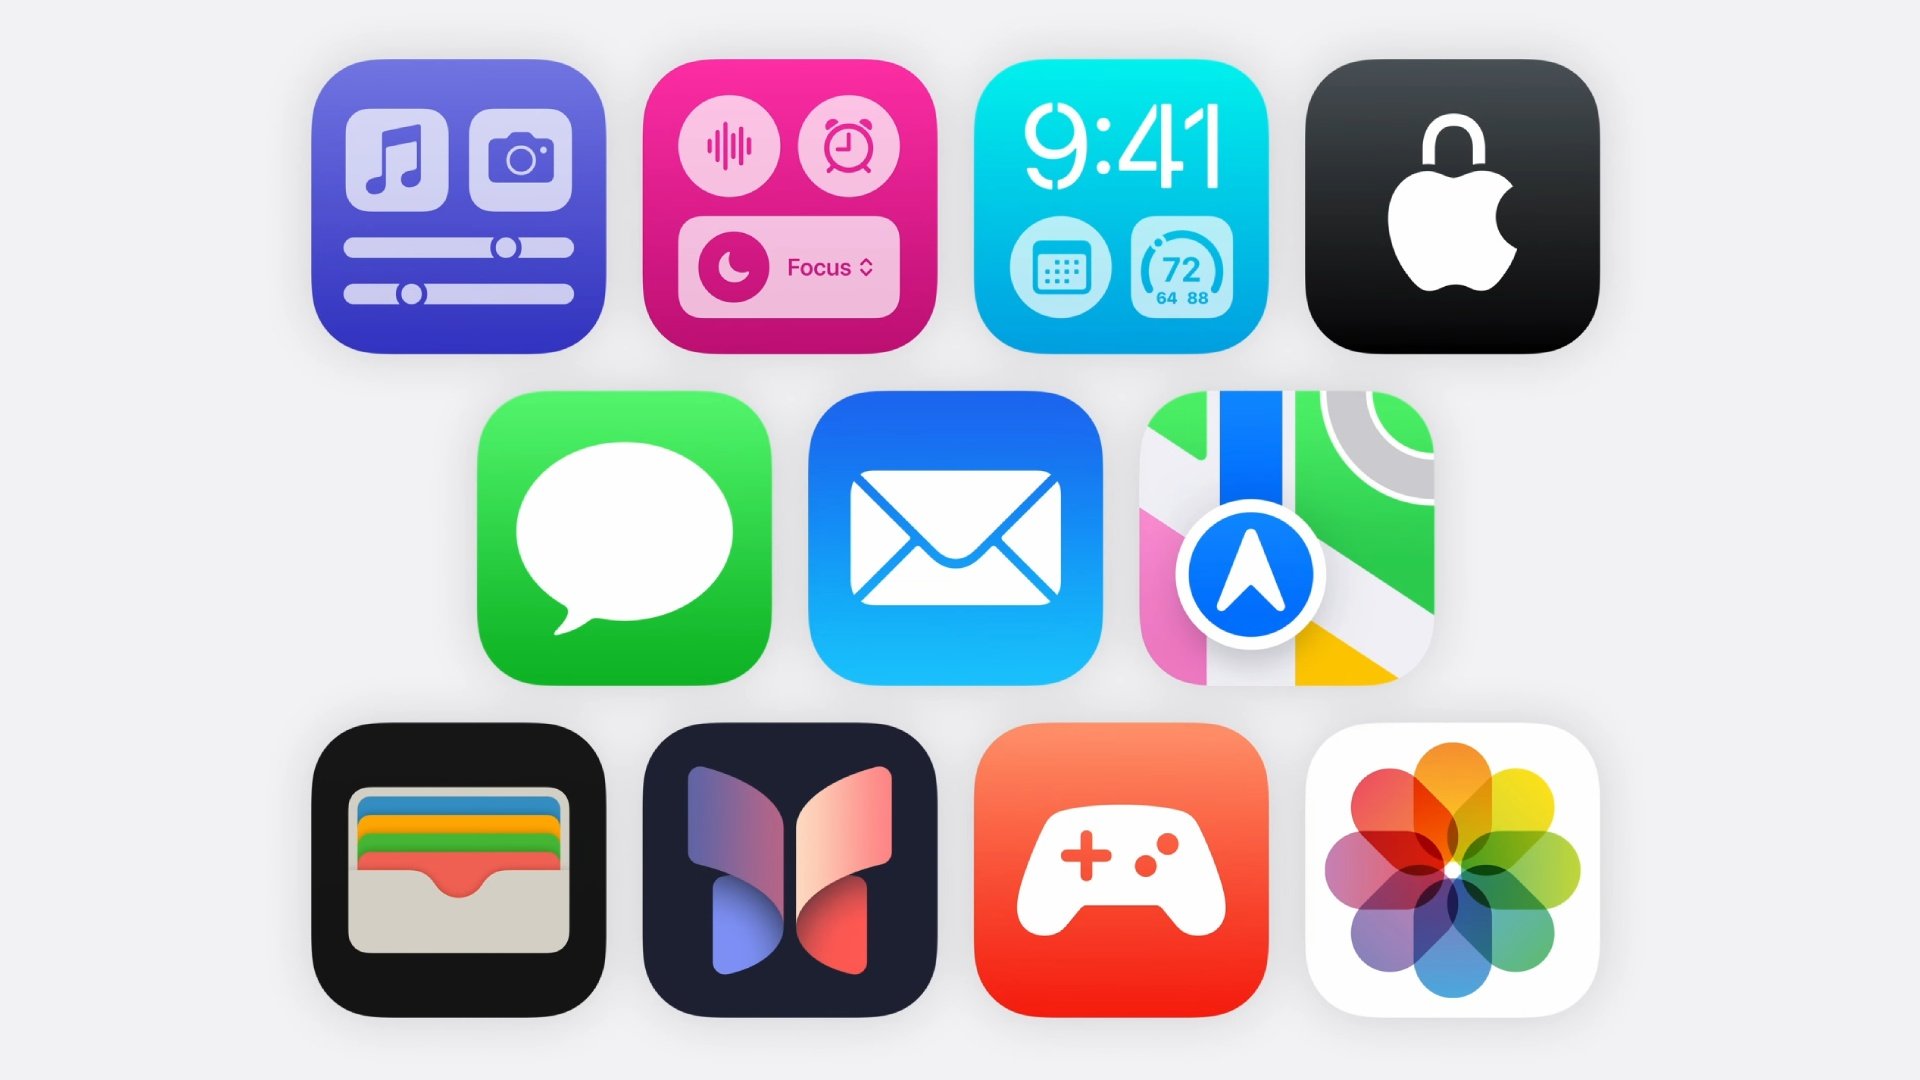 Apple’s iOS 18 introduces new customization options, redesigned Photos app, Game Mode, and more